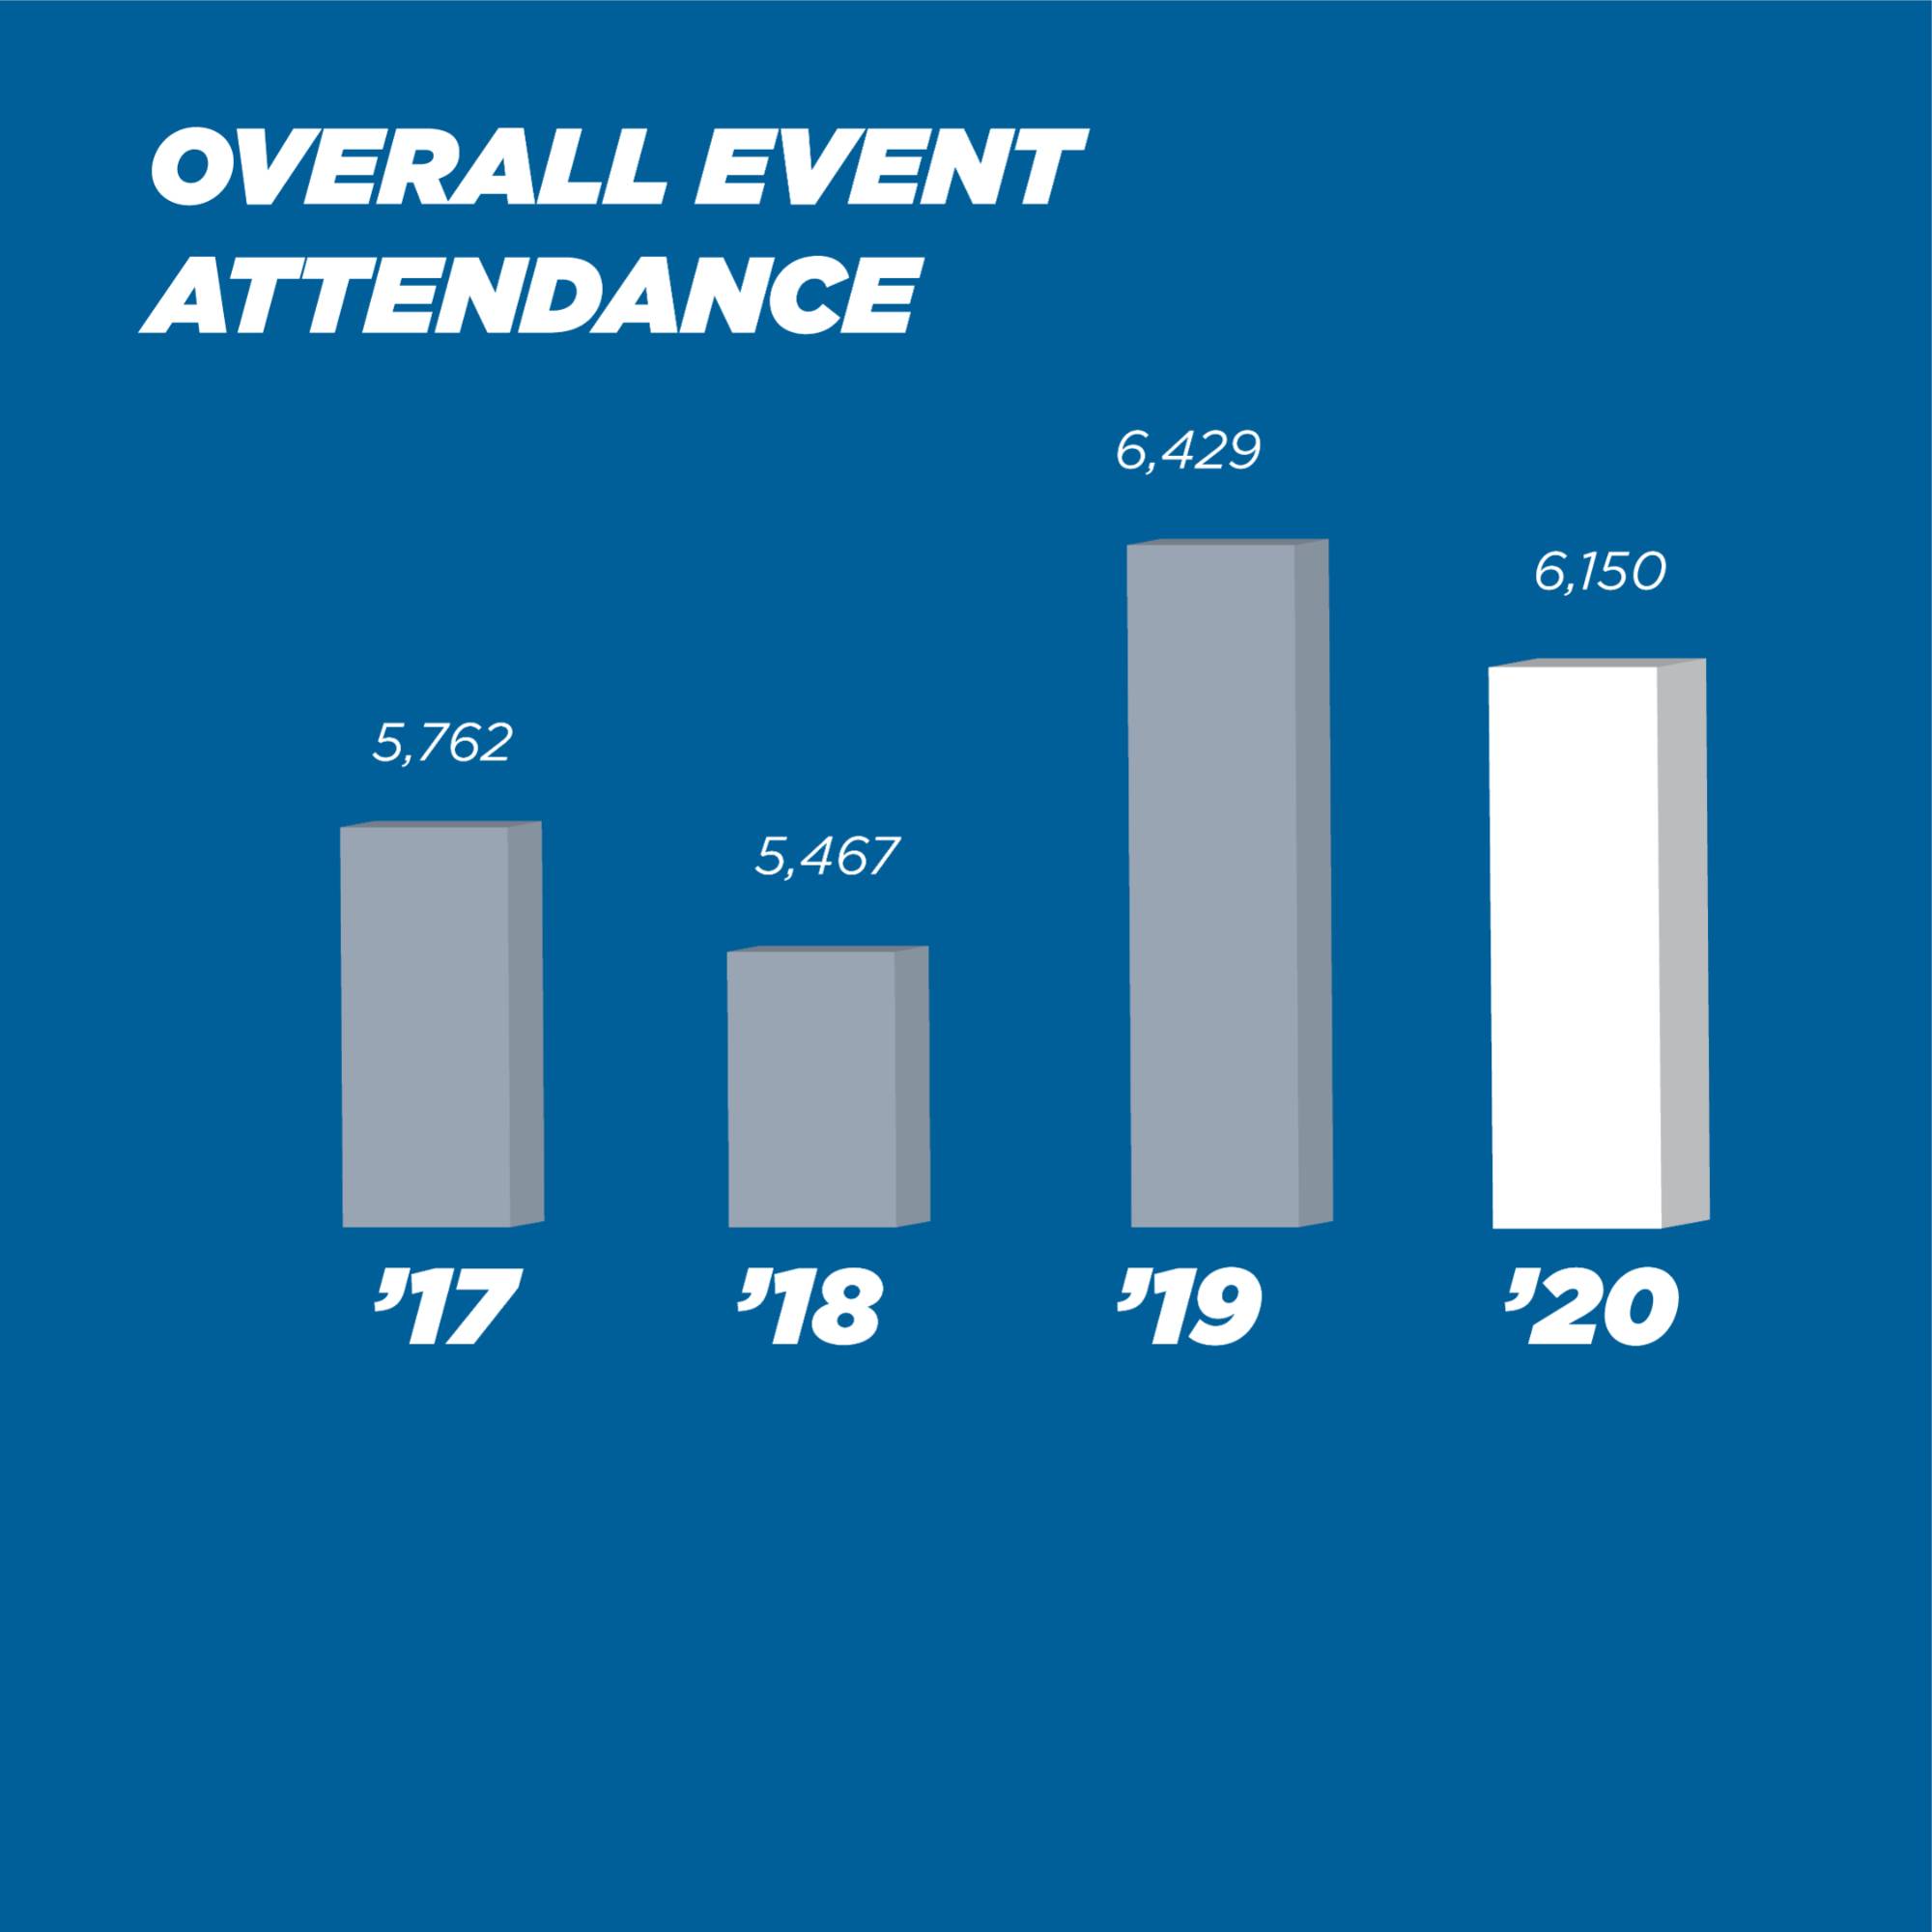 A graph showing that this this years overall event attendance is at 6,150 people.